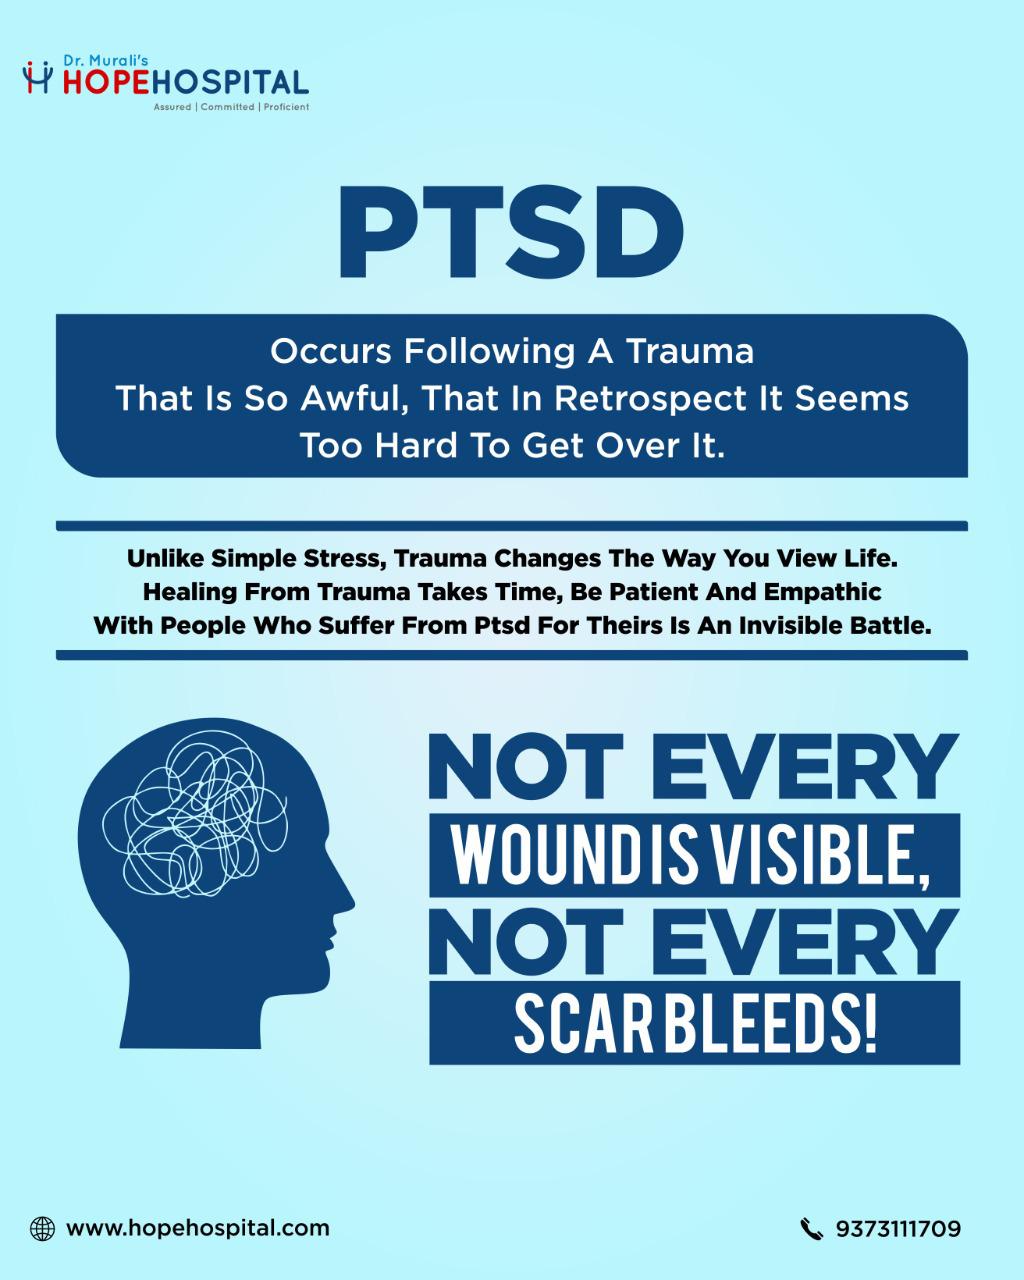 What Are PTSD Triggers, PTSD, Post Traumatic Stress Disorder, Triggers